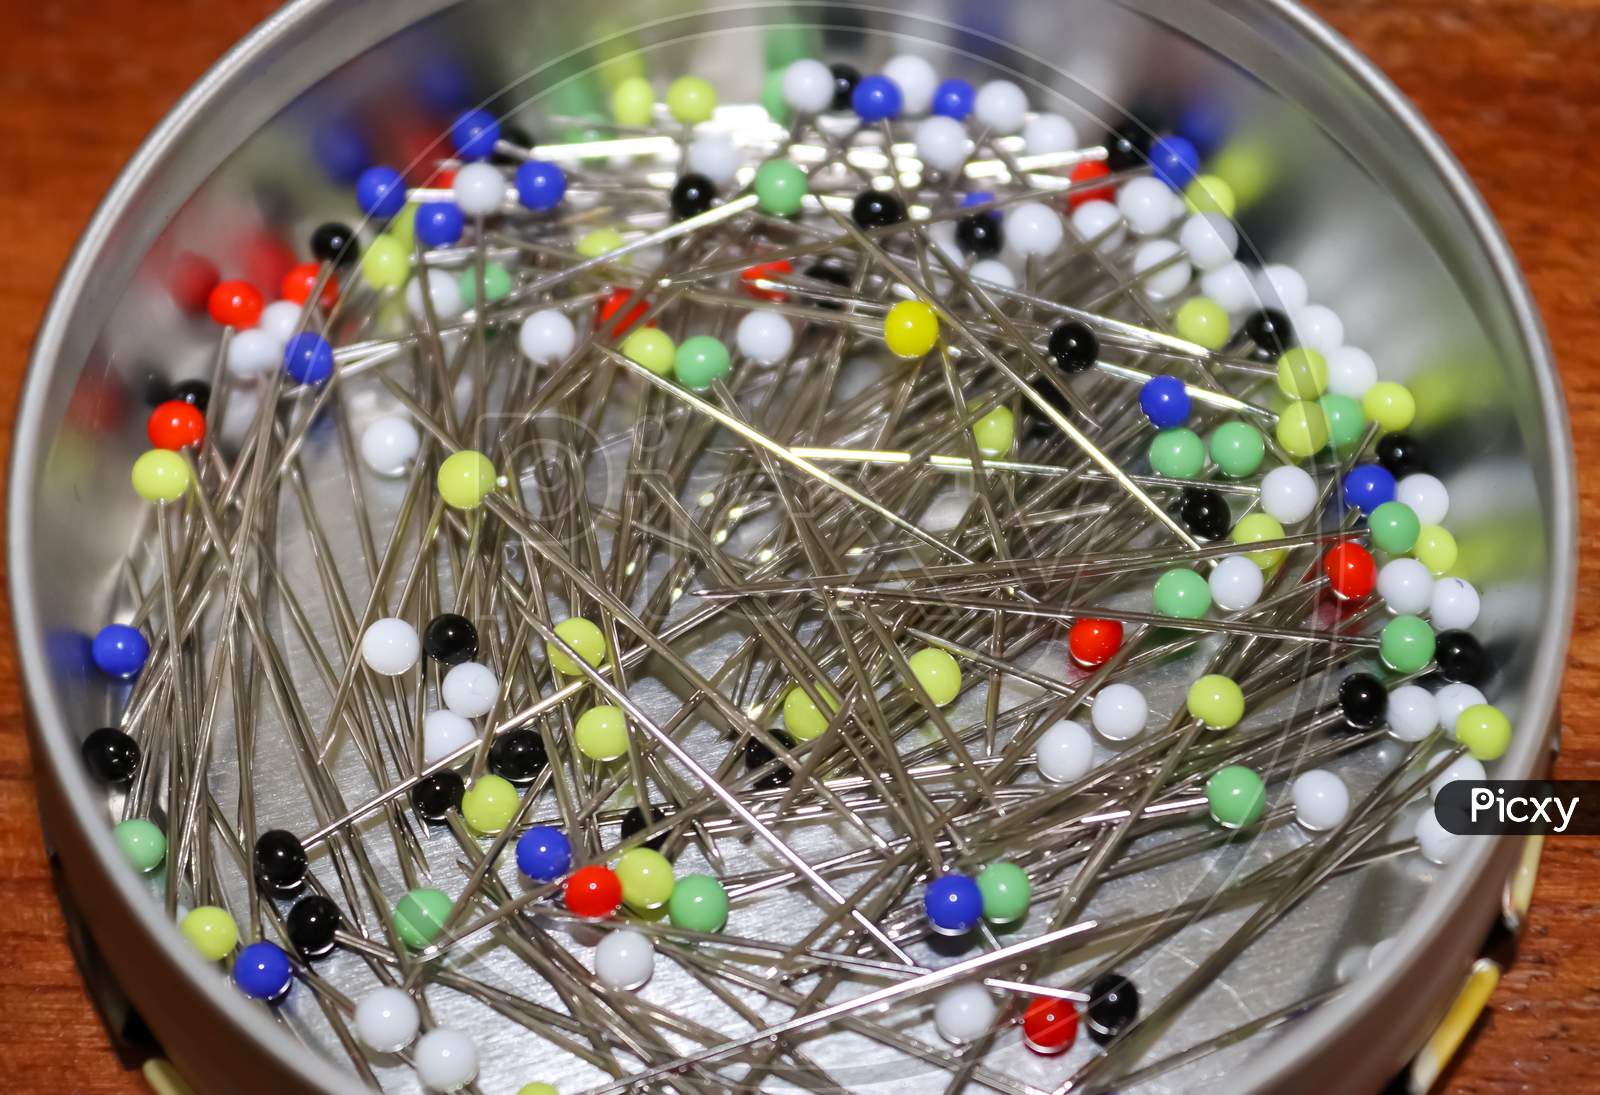 Close Up View On Lots Of Sewing Pins With Colored Heads In A Metal Box On A Wooden Table